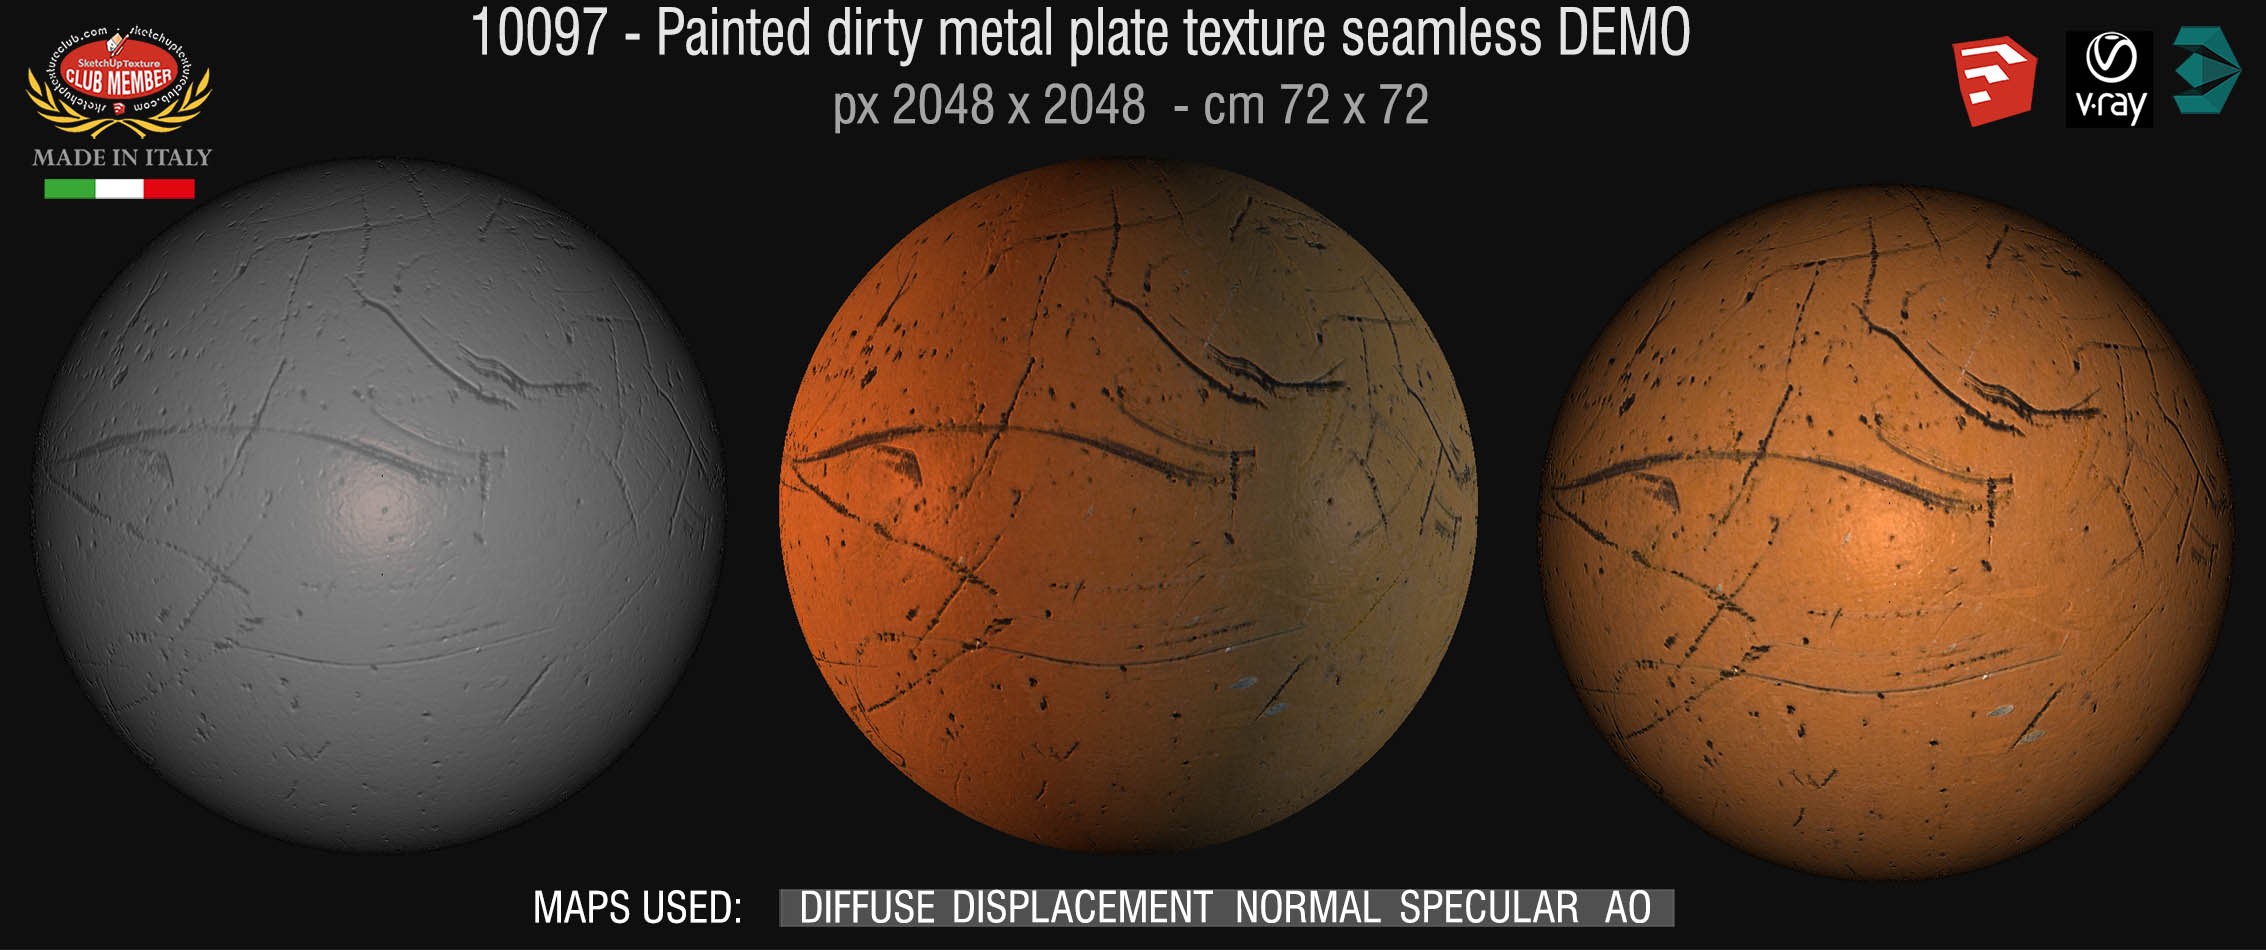 10097 HR Painted dirty metal texture seamless + maps DEMO